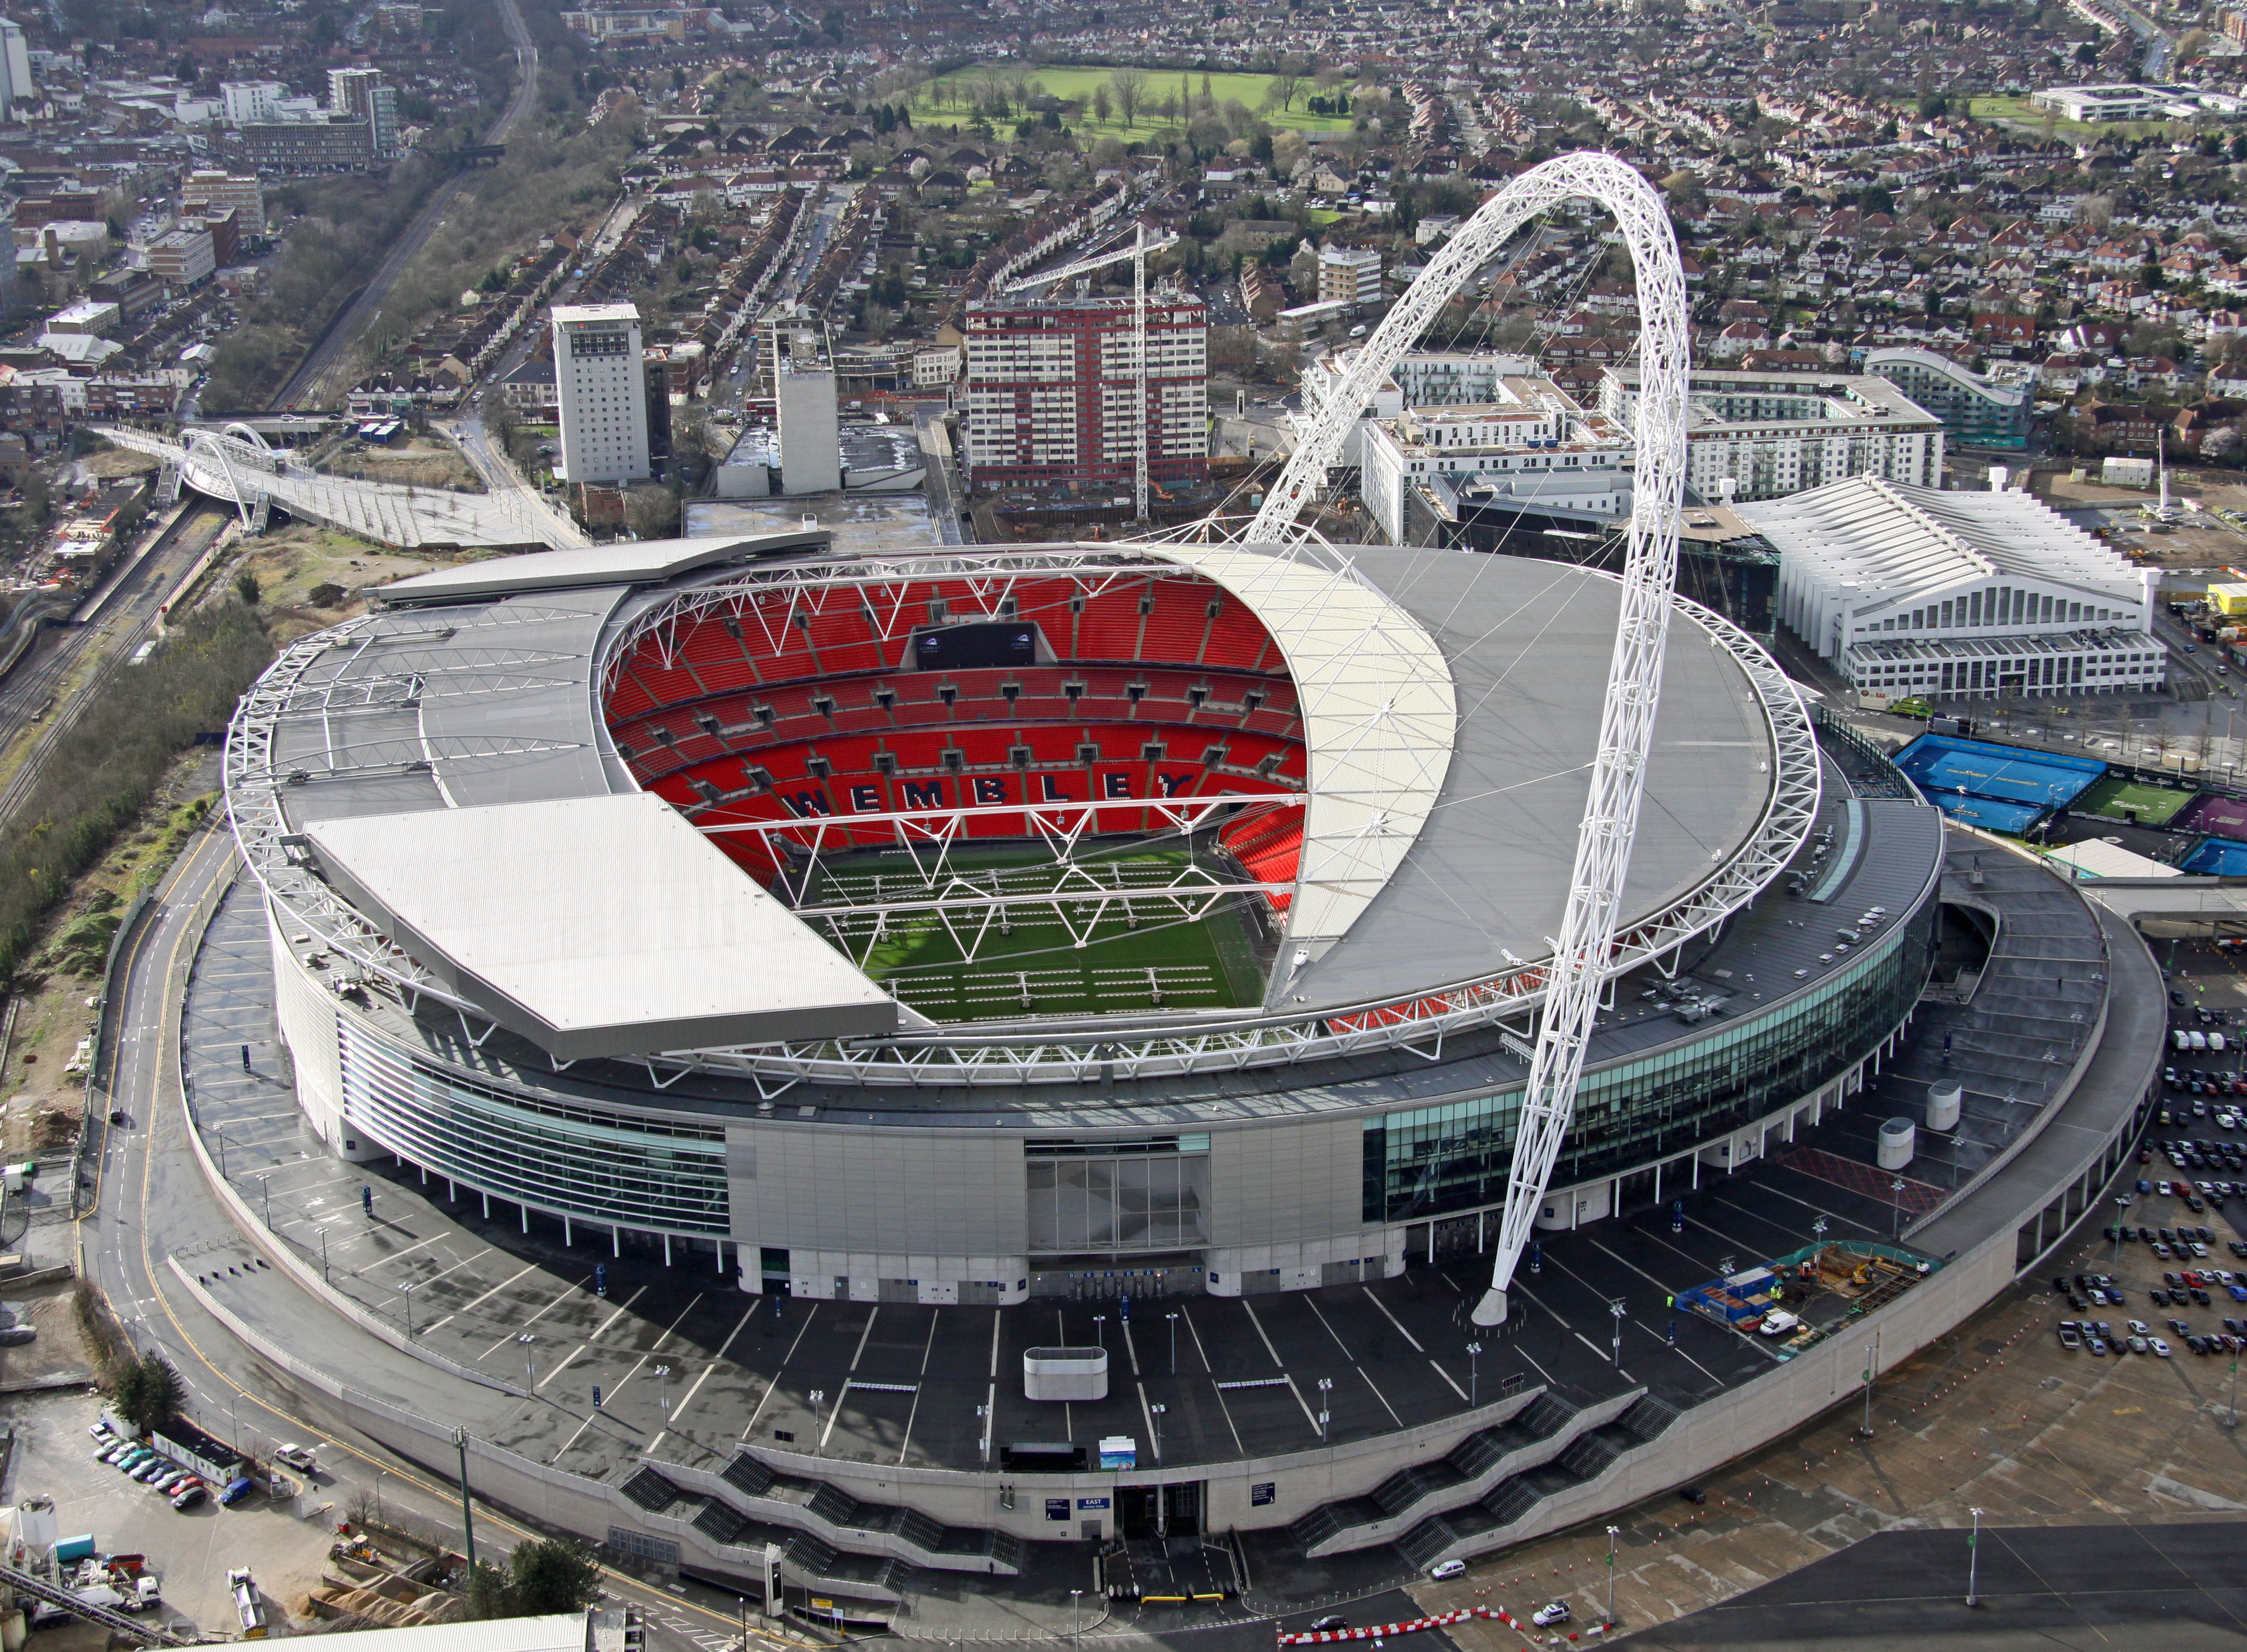 Wembley Stadium is predicted to be the most dangerous of all of the UK venues where Swift will be performing this summer